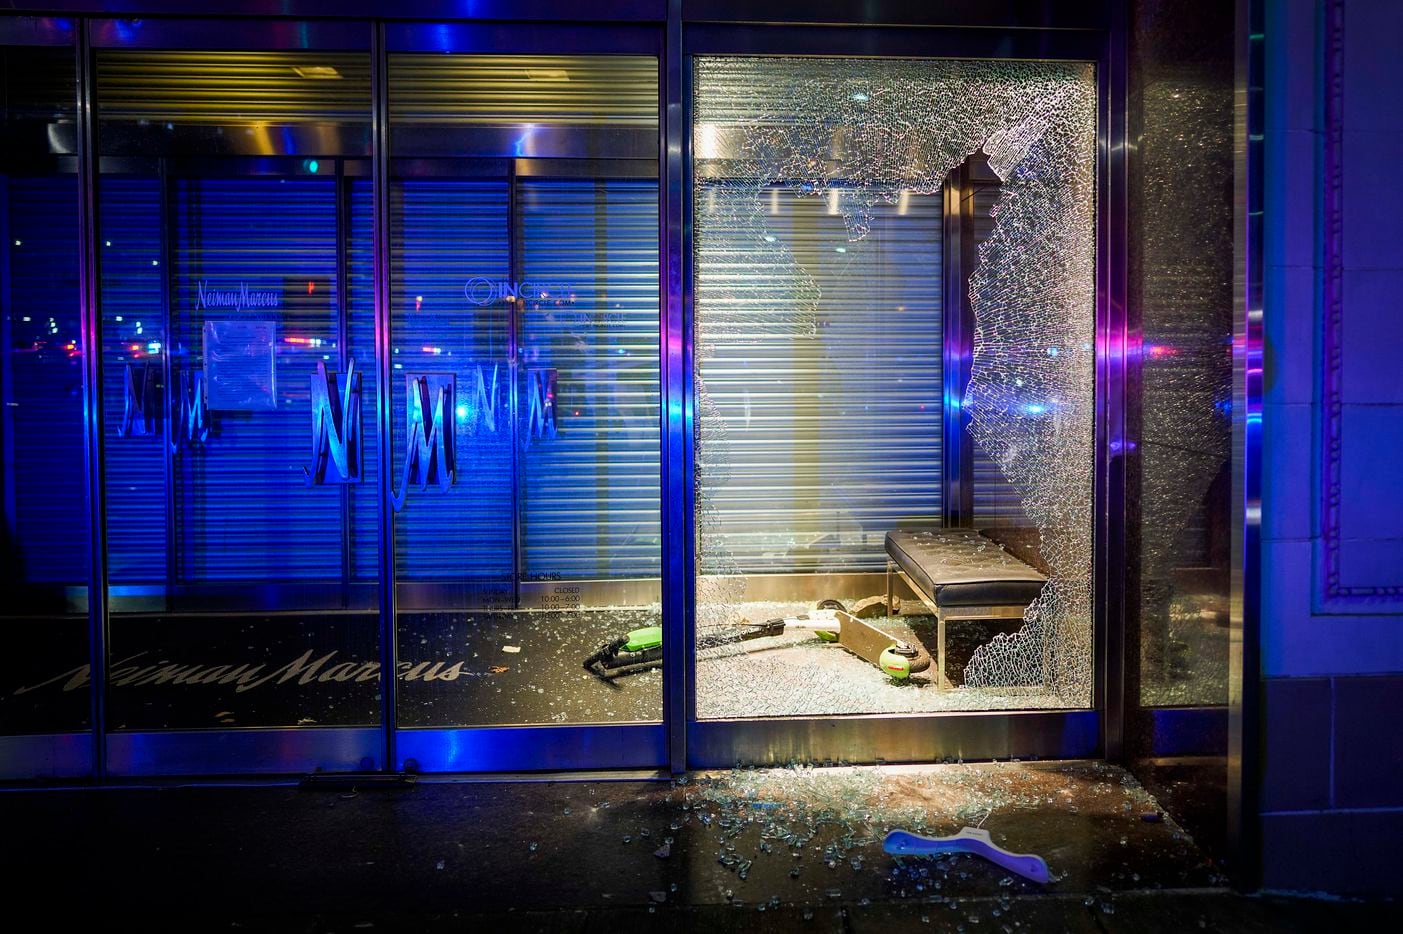 A rental scooter rest amidst broken glass after windows were smashed at the Nieman Marcus...